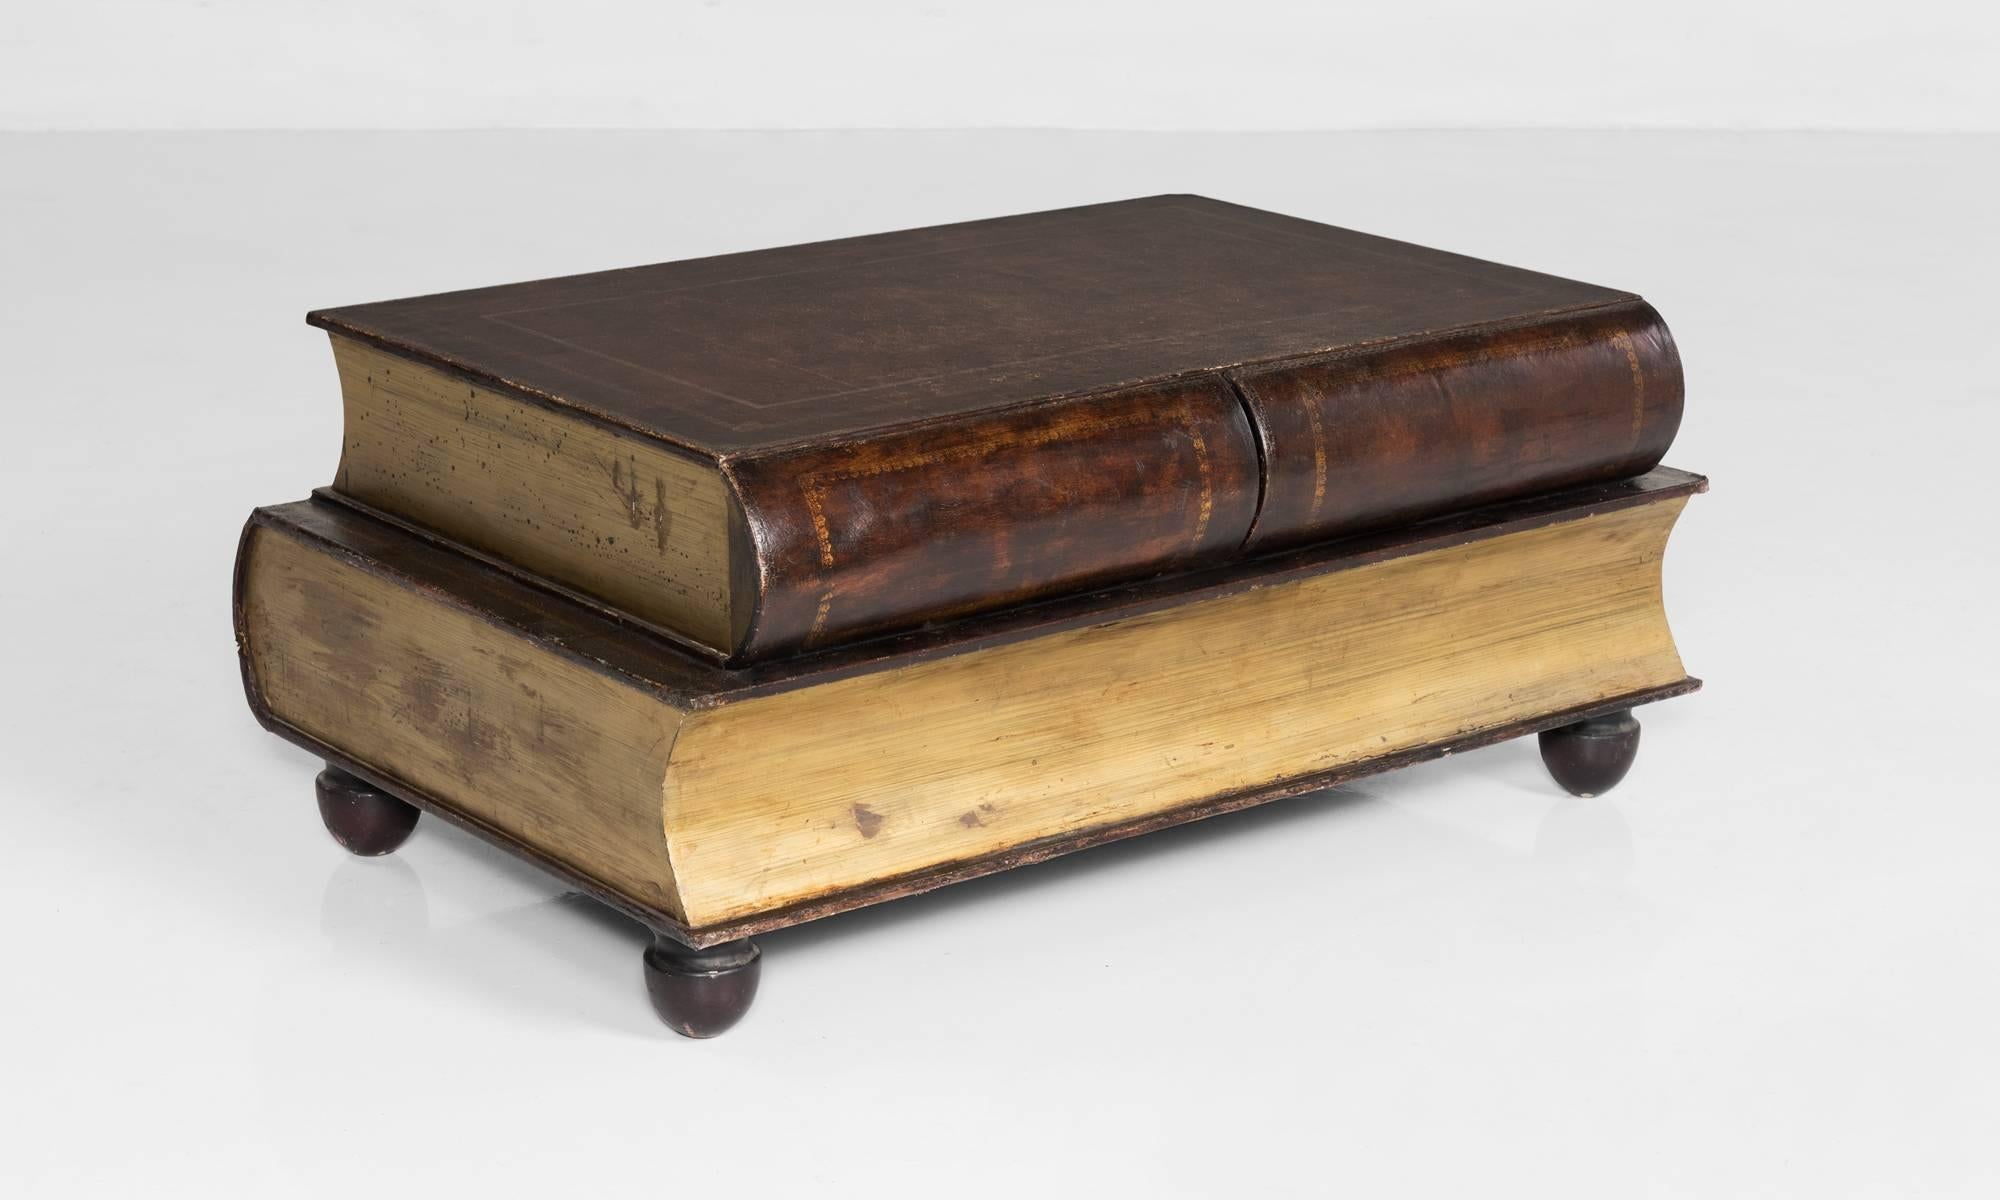 Leather cladded book coffee table, made in England, circa 1950.

Two trompe l’oeil painted staggered book forms feature two hidden drawers.